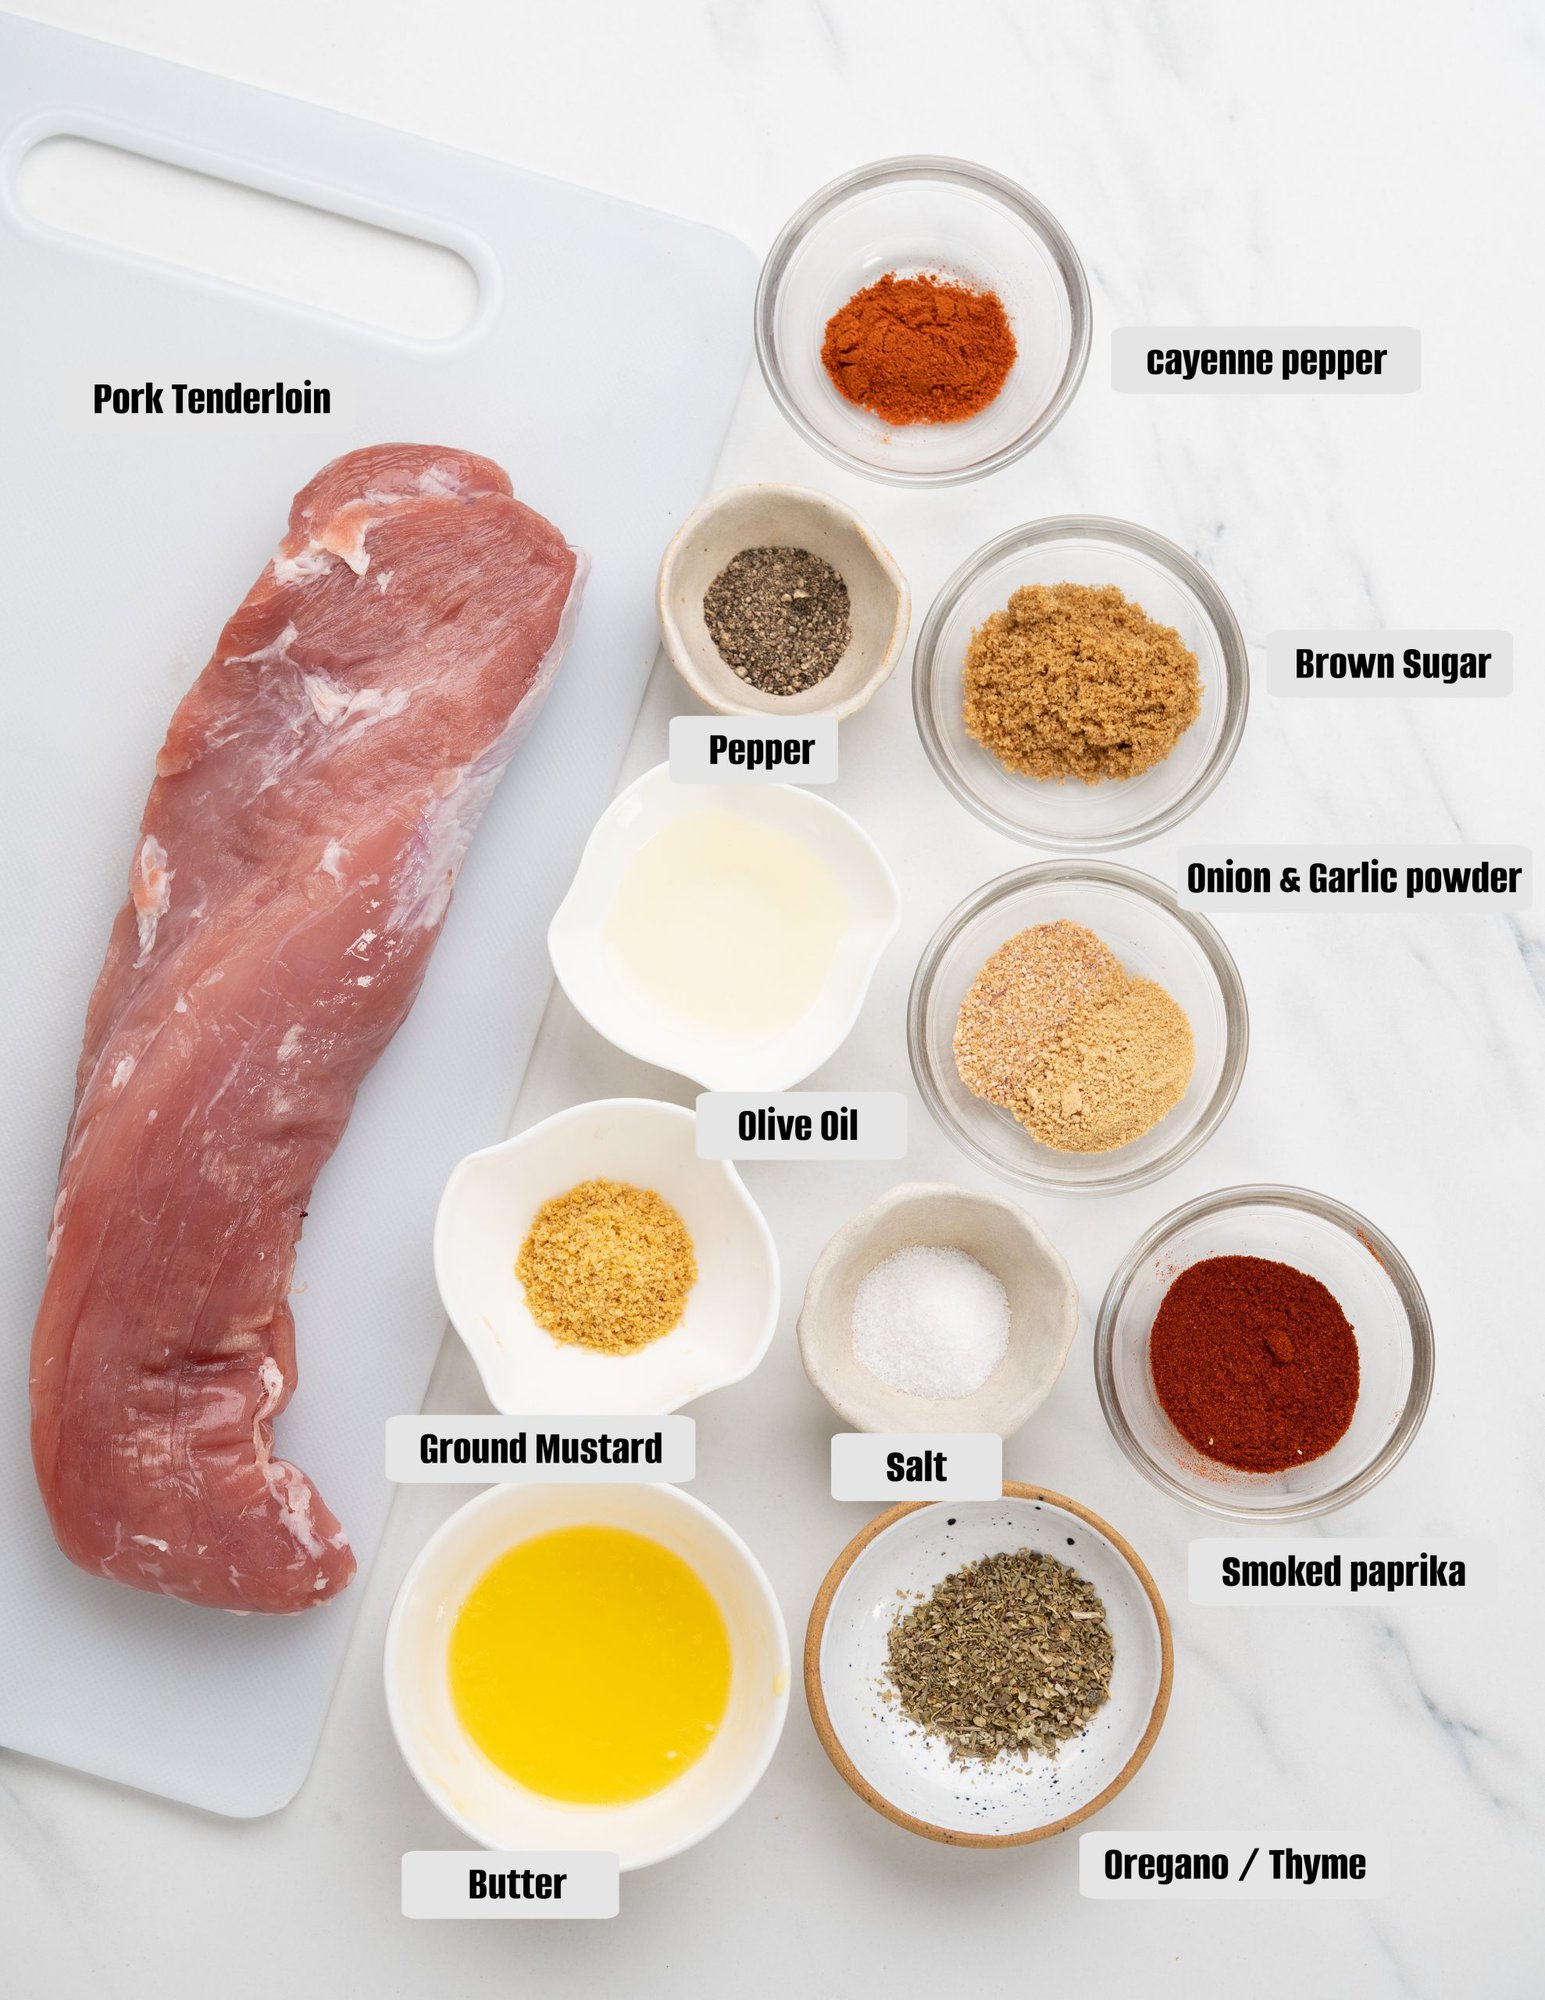 Ingredients to bake pork tenderloin - a flavorful dry rub seasoning with spices and  herb blend